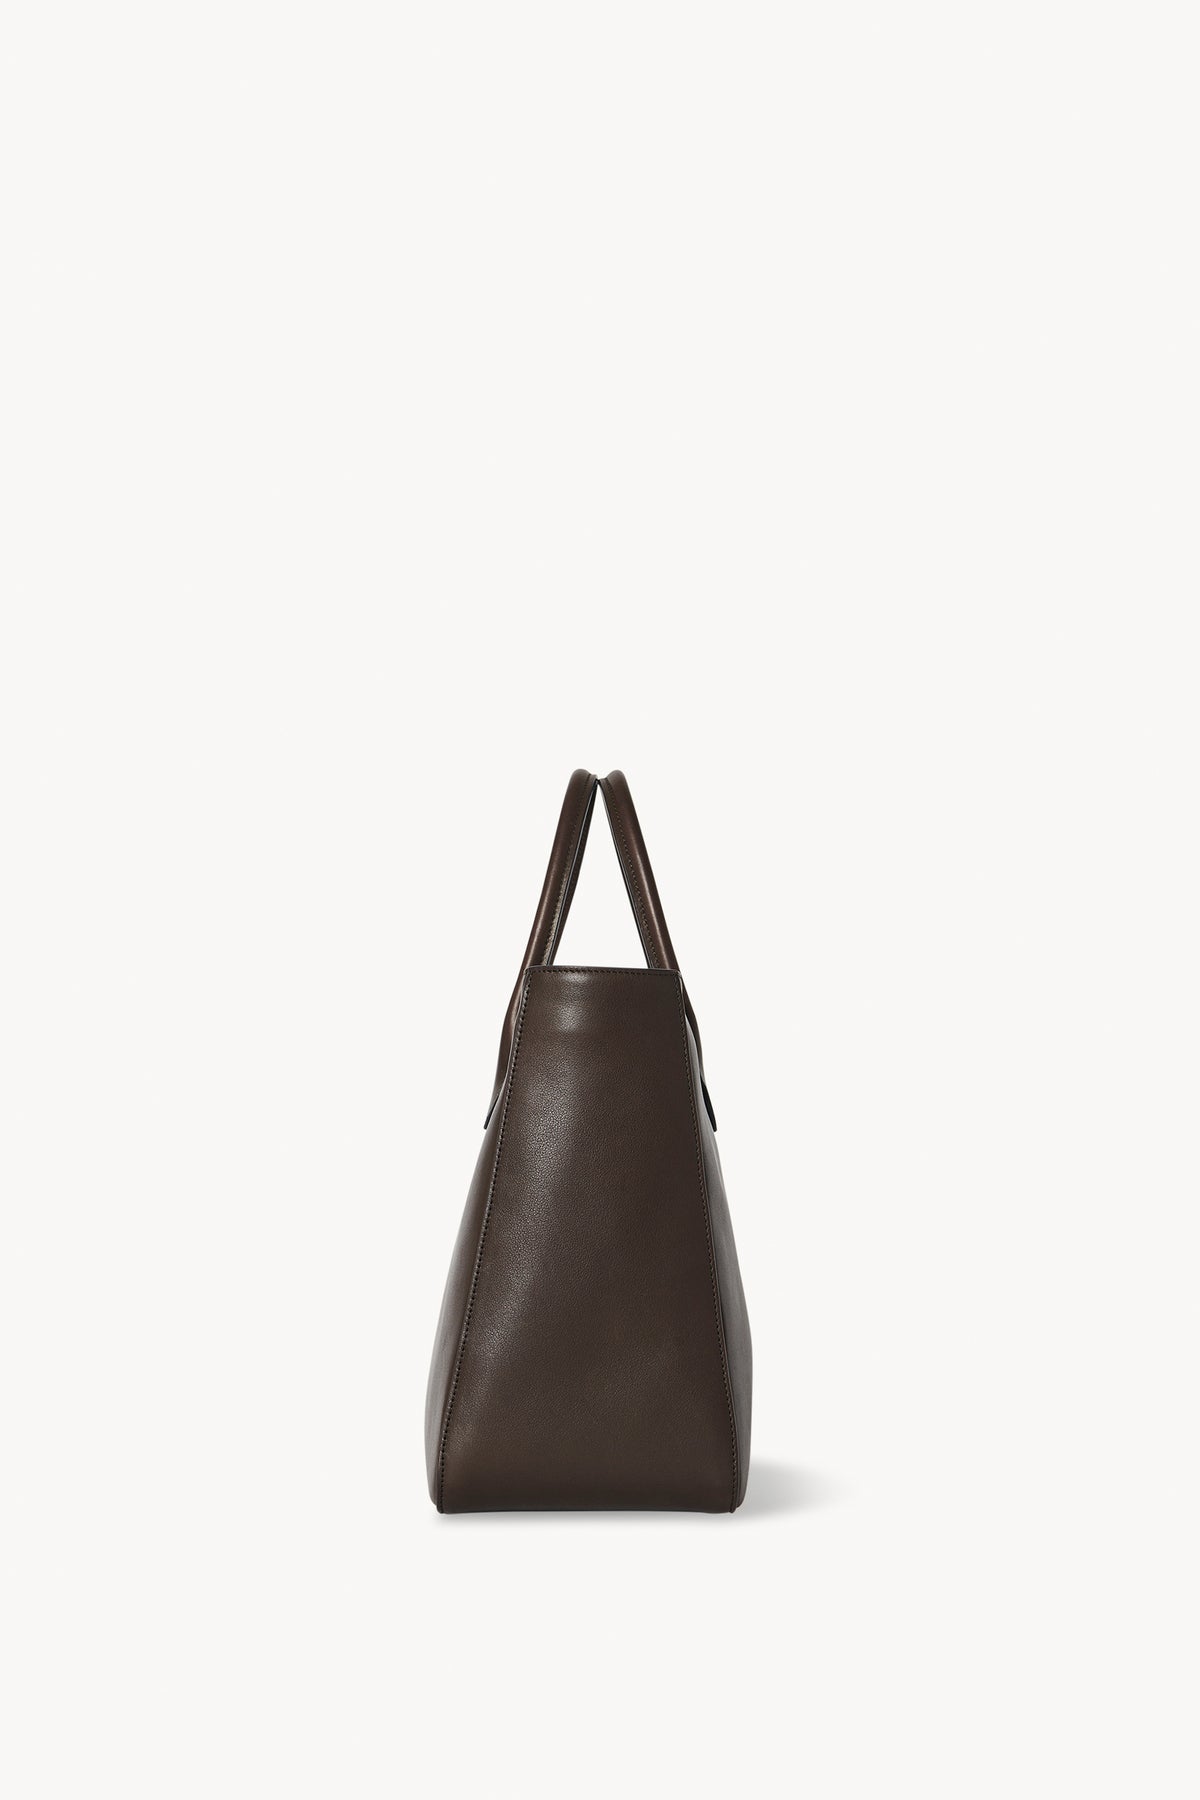 The Row - Day Luxe Tote Bag Brown for Women - 24S